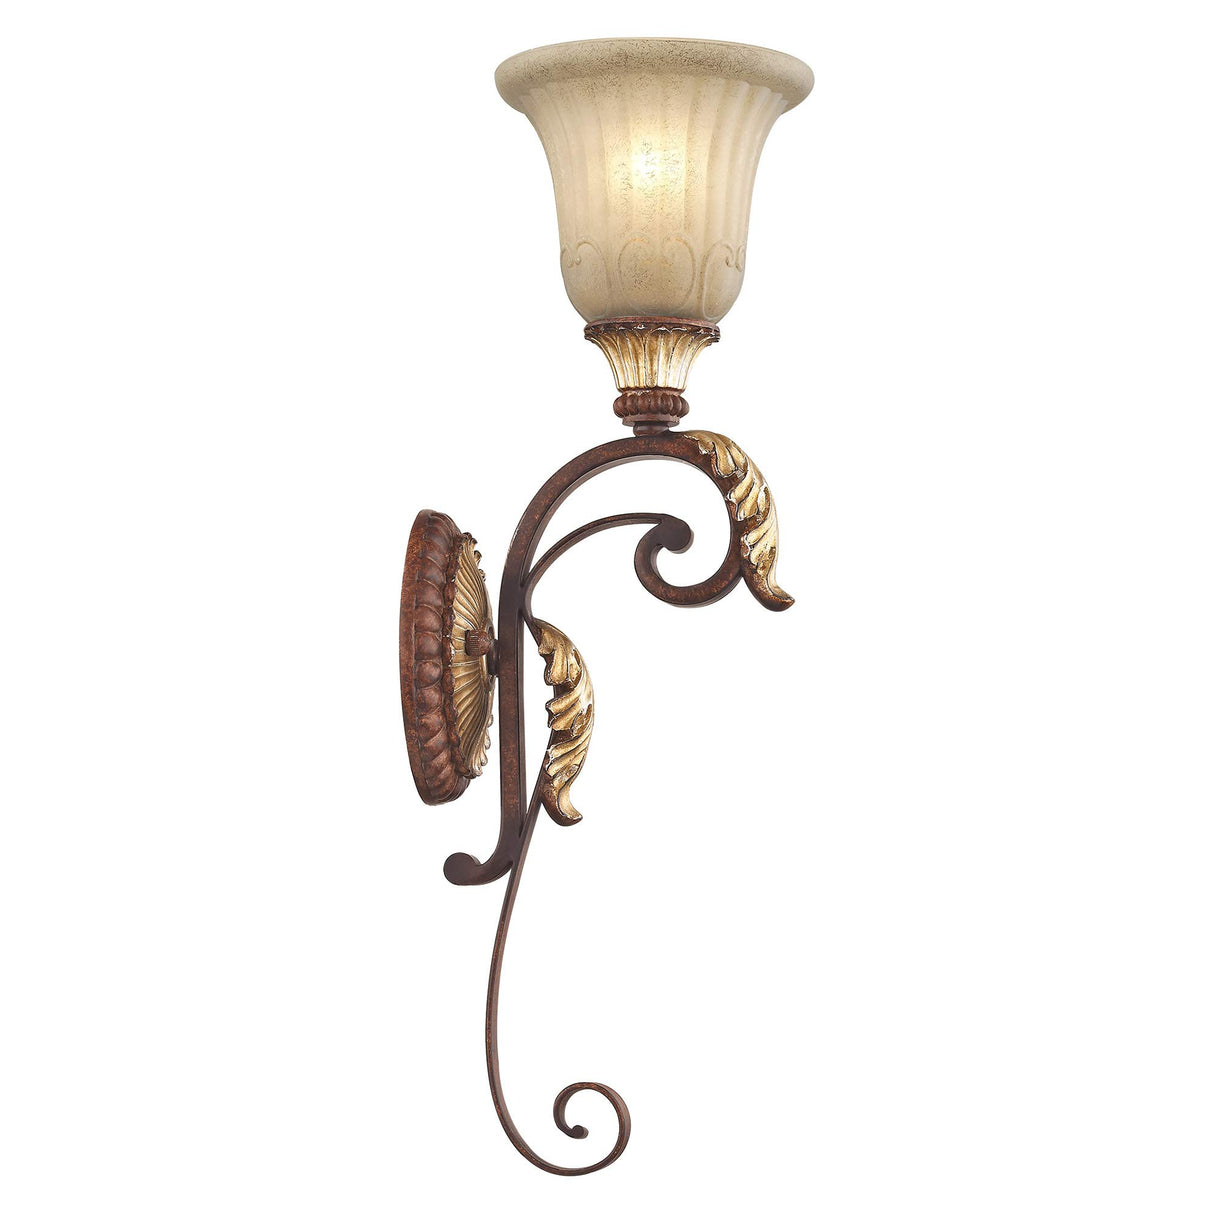 Livex Lighting 8581-63 Villa Verona 1 Light Verona Bronze Finish Wall Sconce with Aged Gold Leaf Accents and Rustic Art Glass